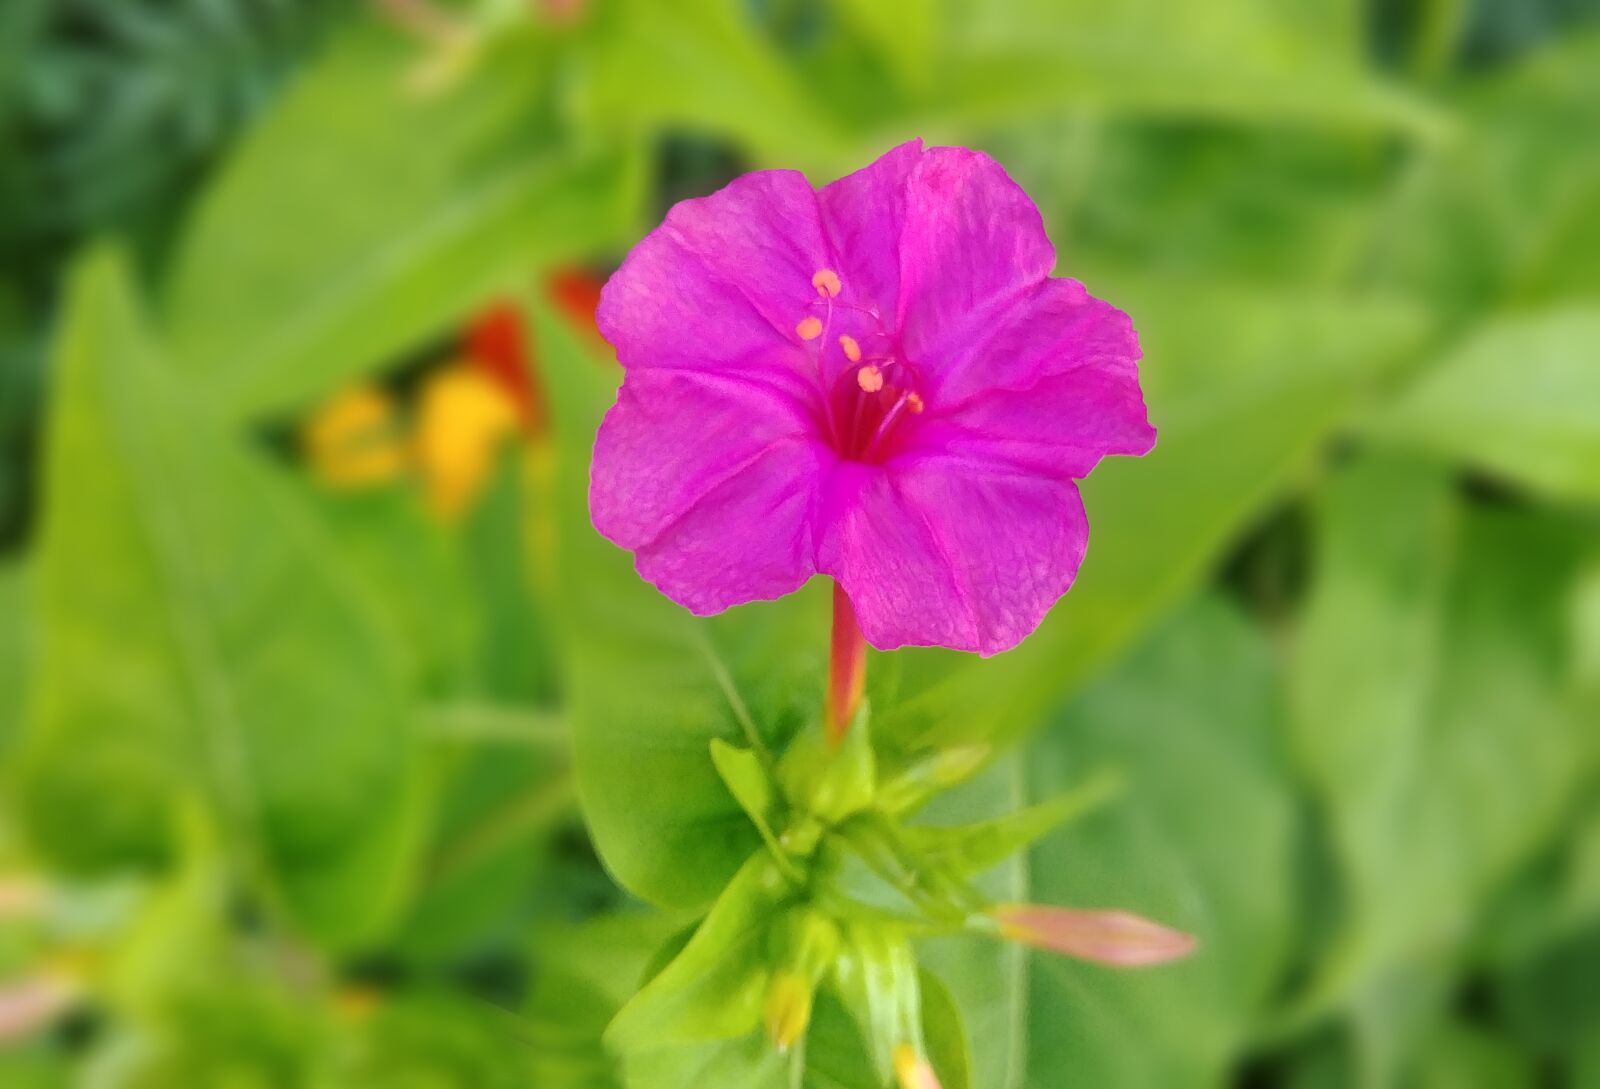 LG G6 sample photo. Minutes flower, red flower photography